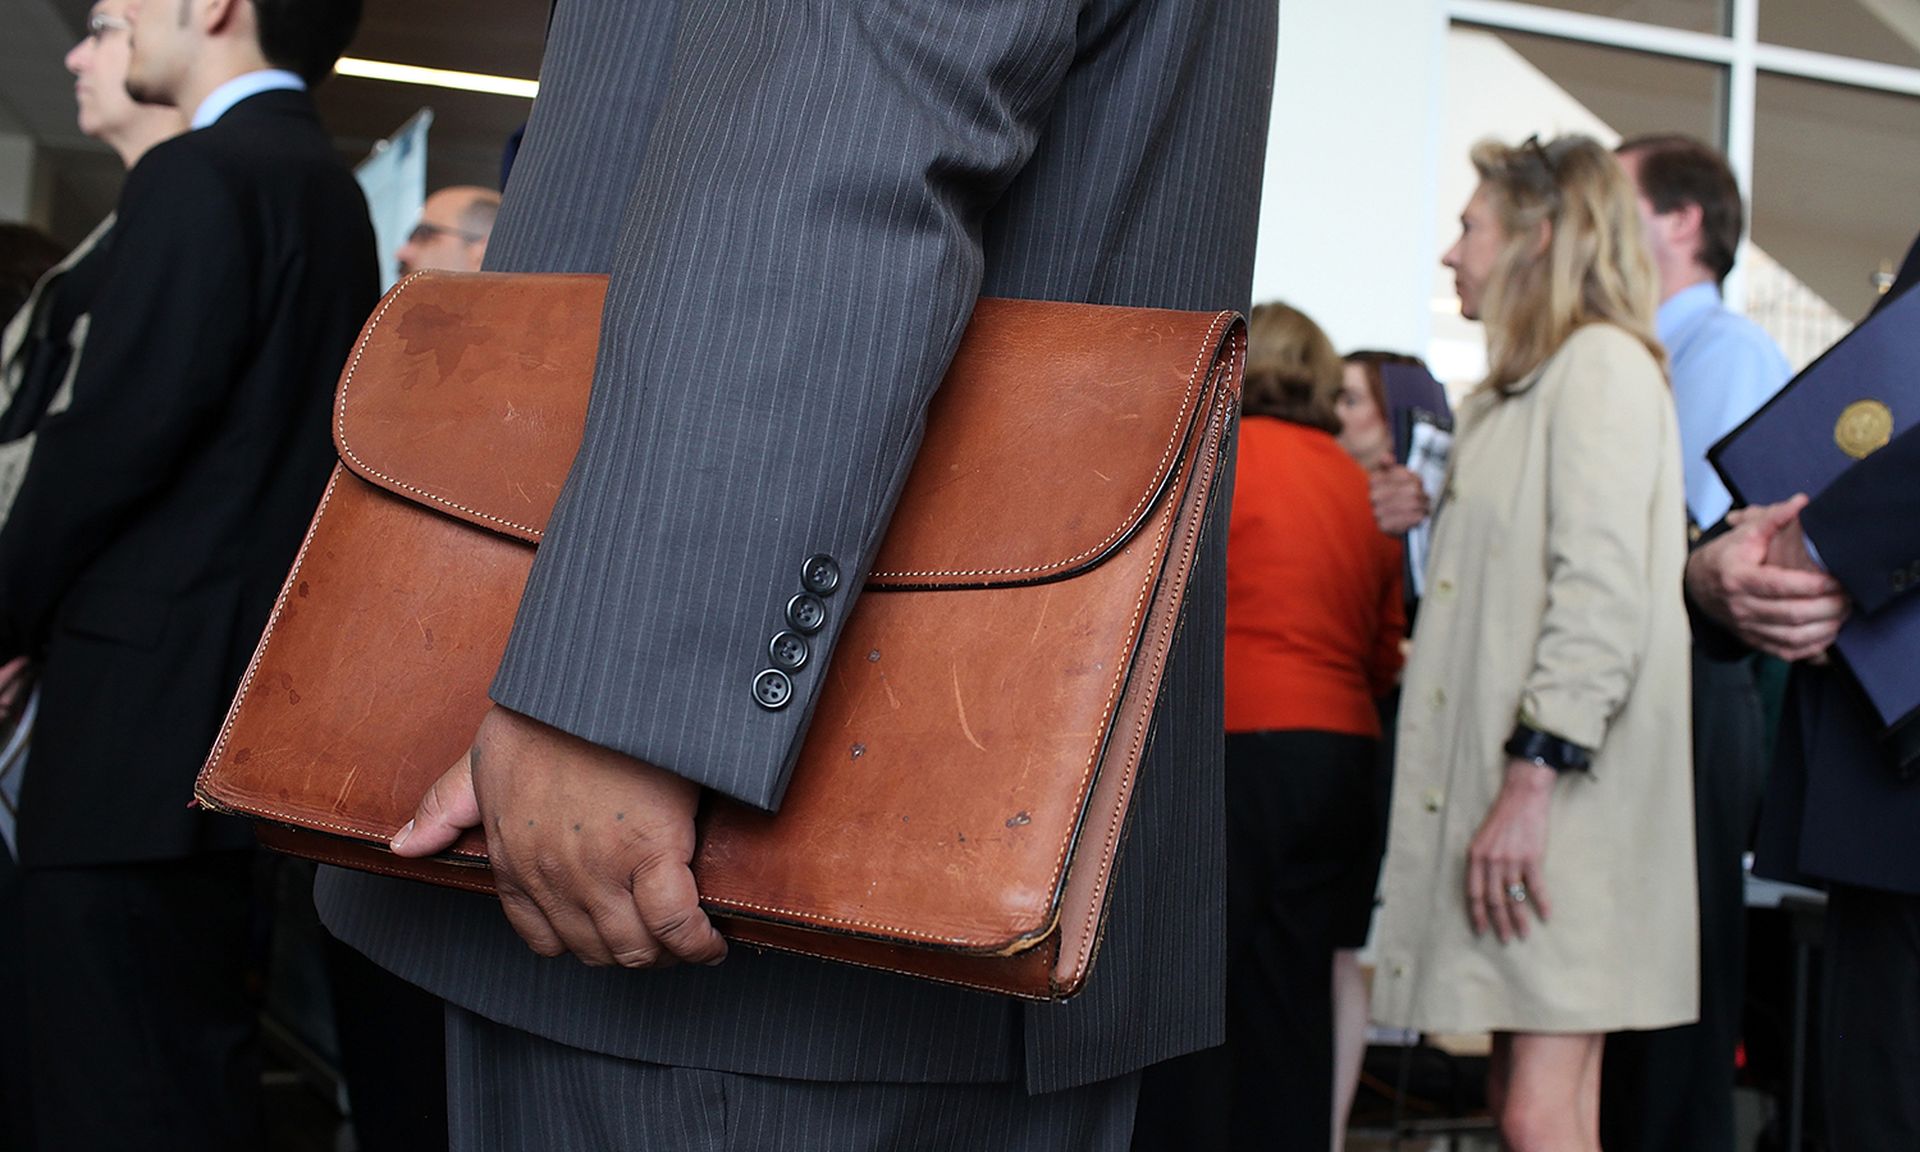 A job seeker holds a briefcase as he waits in line to meet with recruiters.